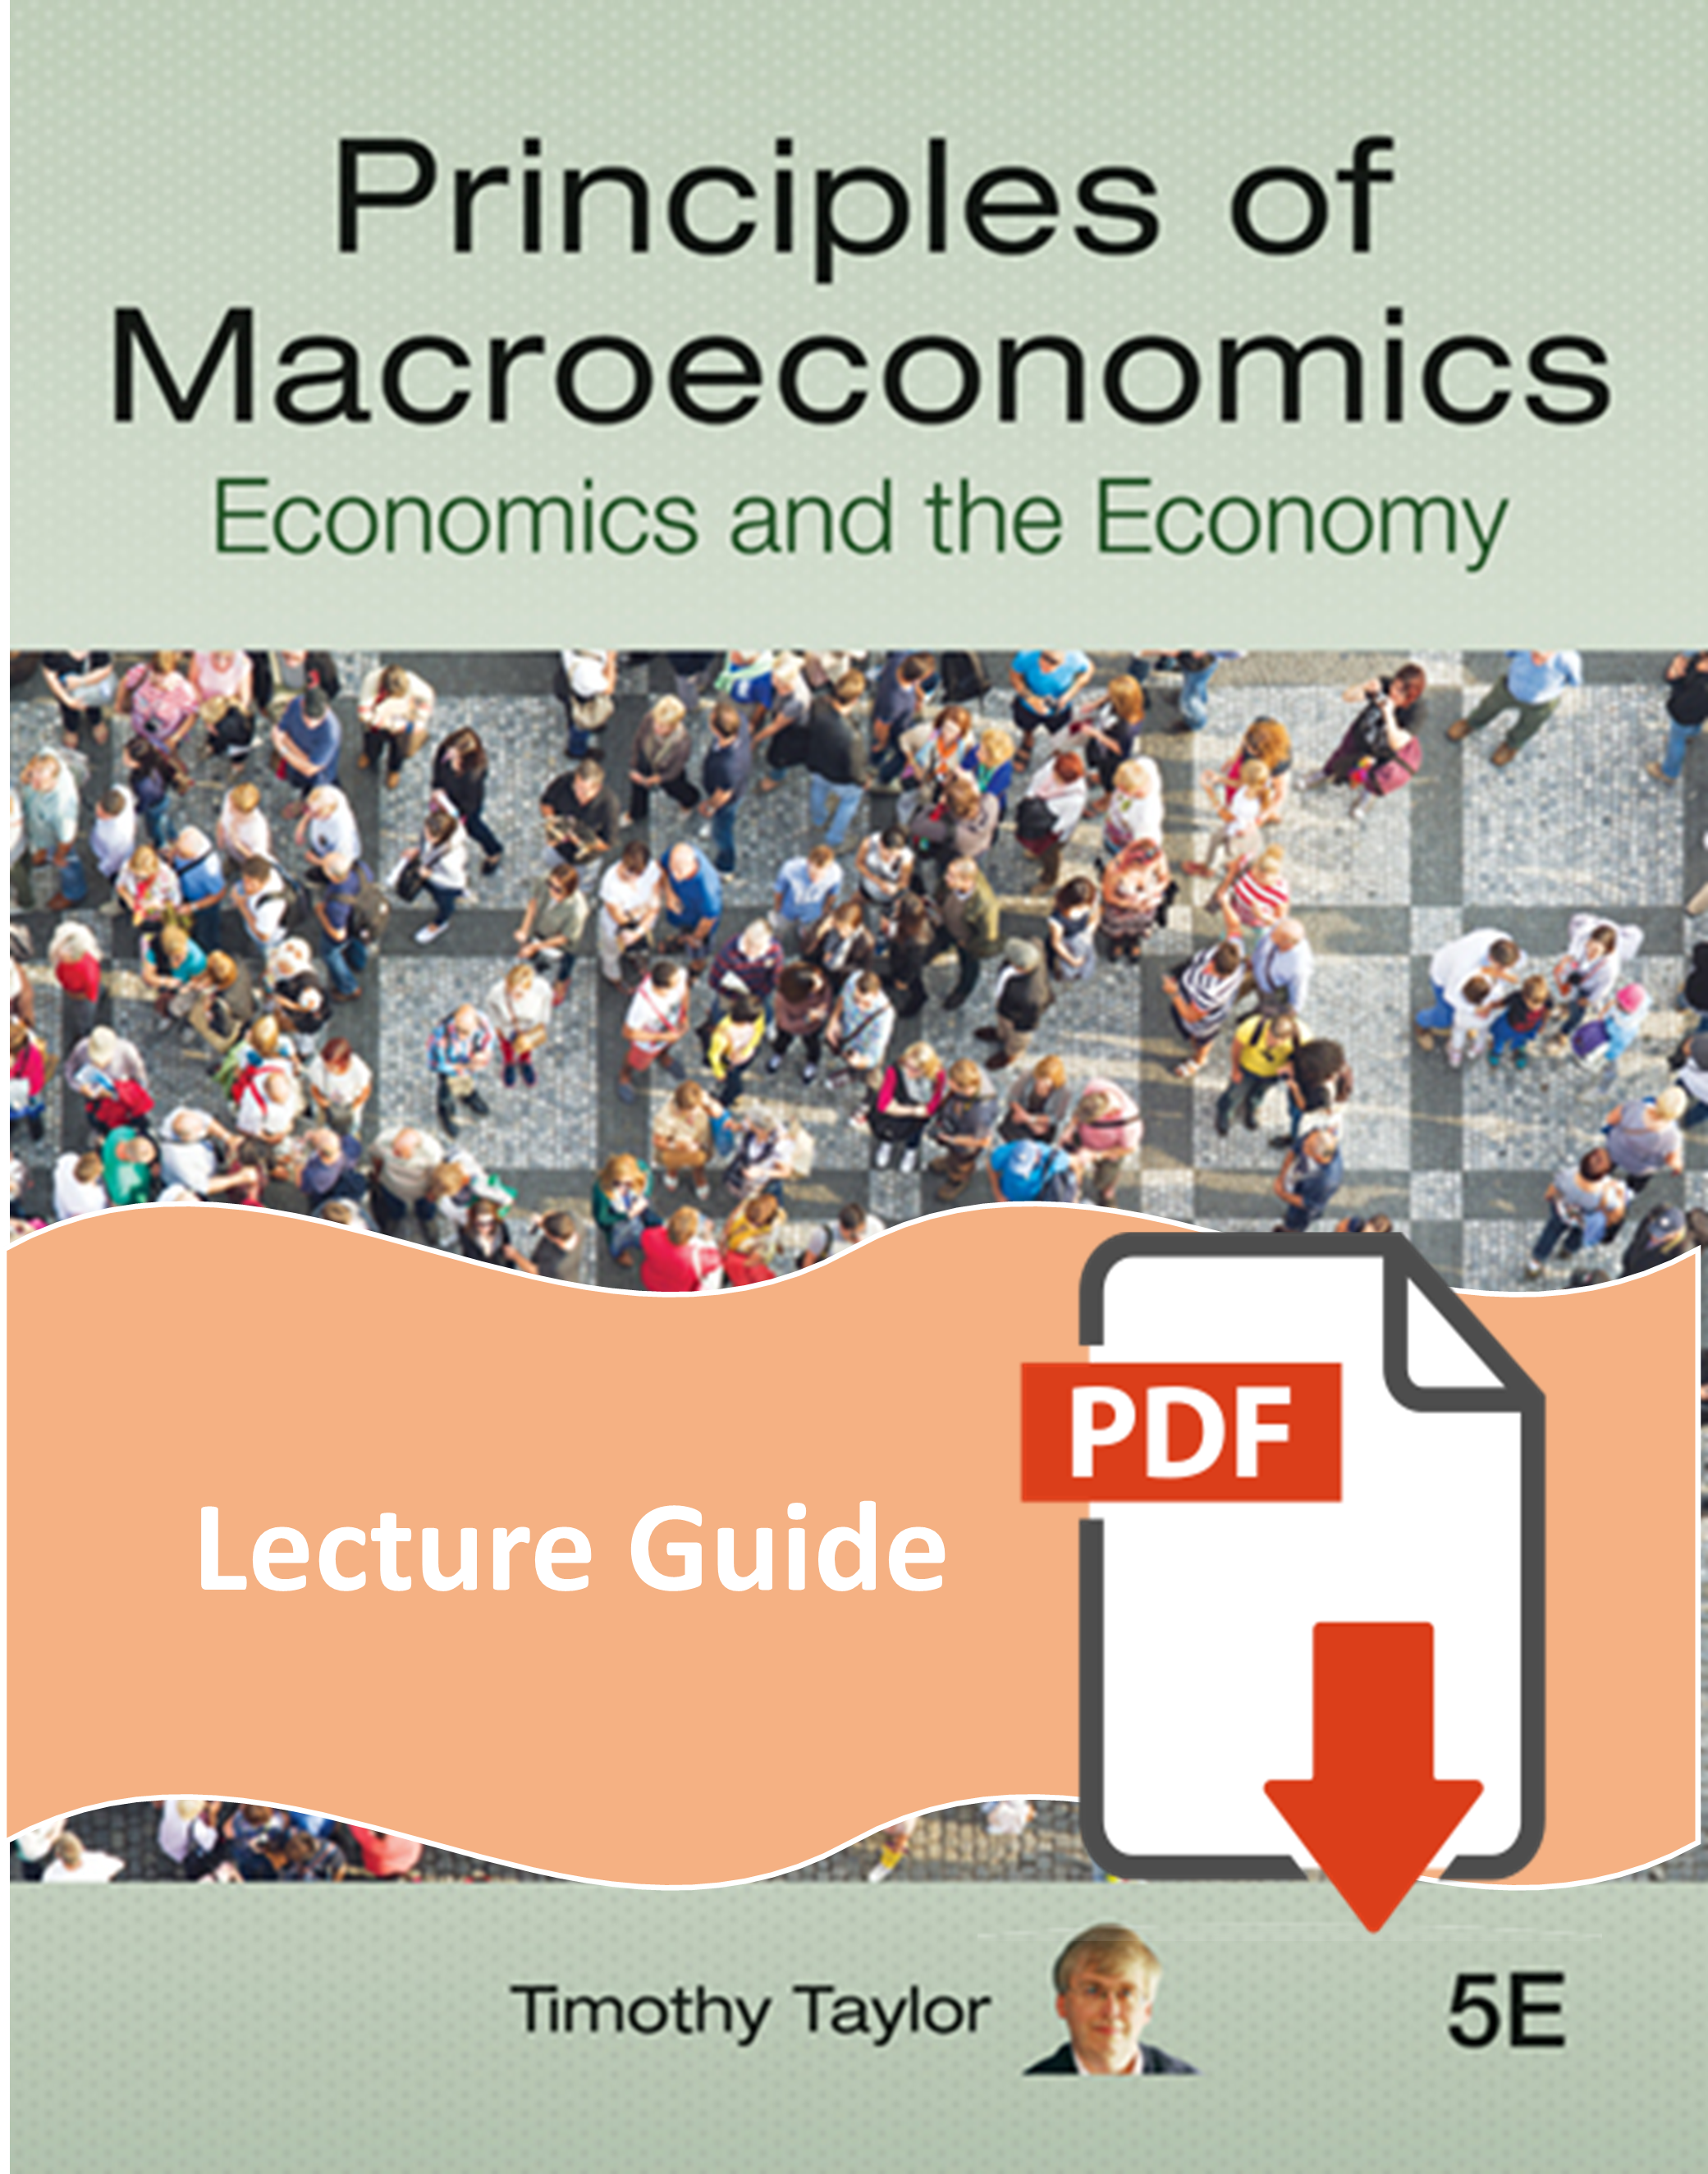 Lecture Guide for Principles of Macroeconomics